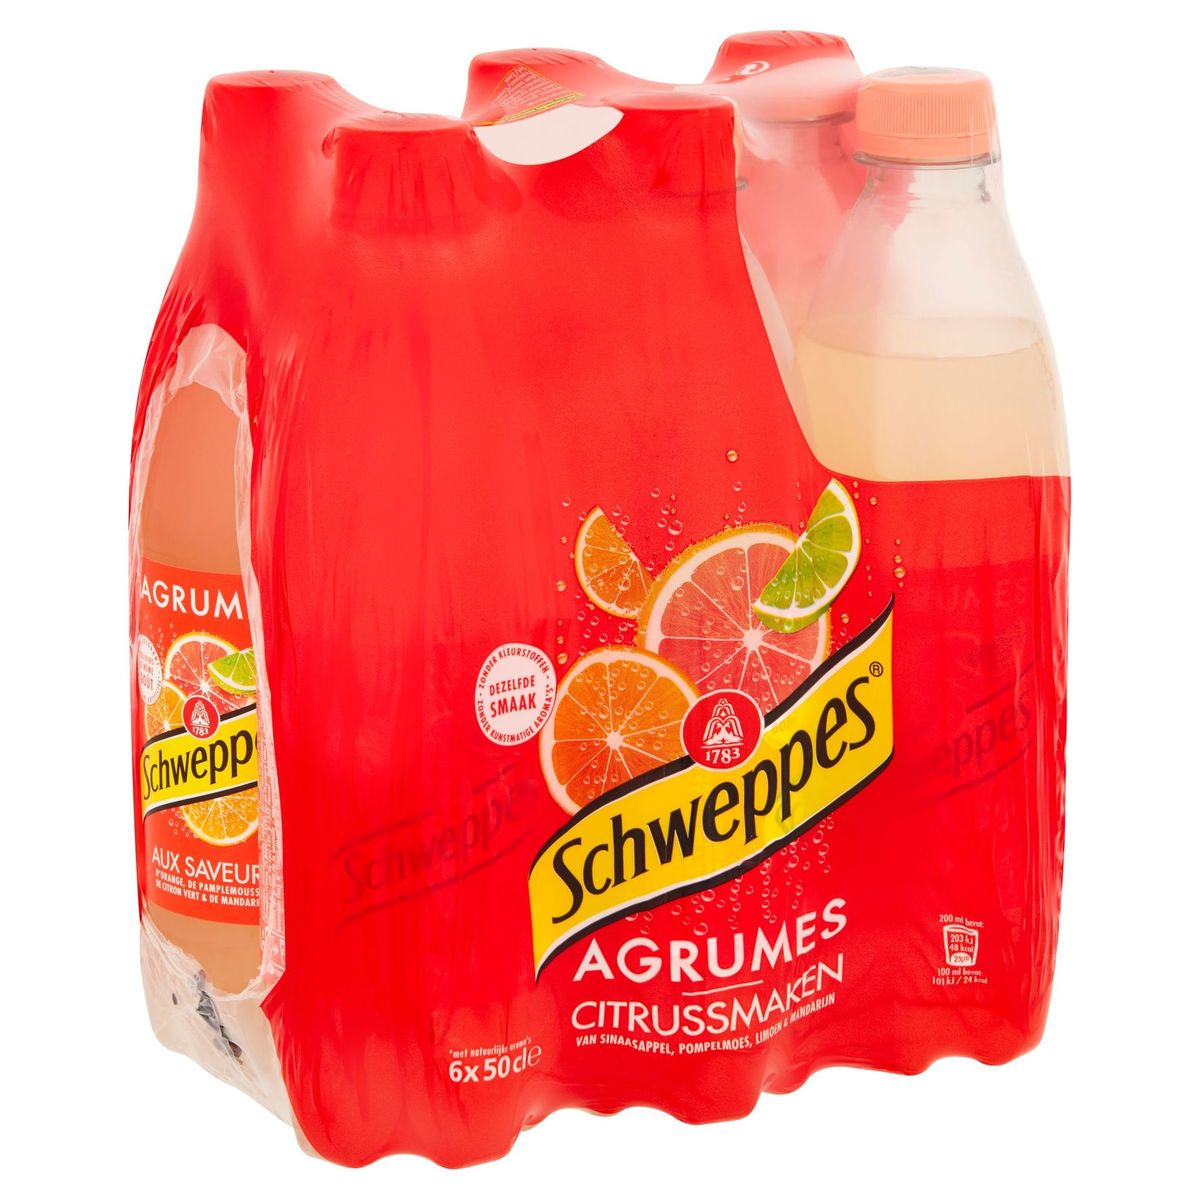 Schweppes Agrumes 6x50cl